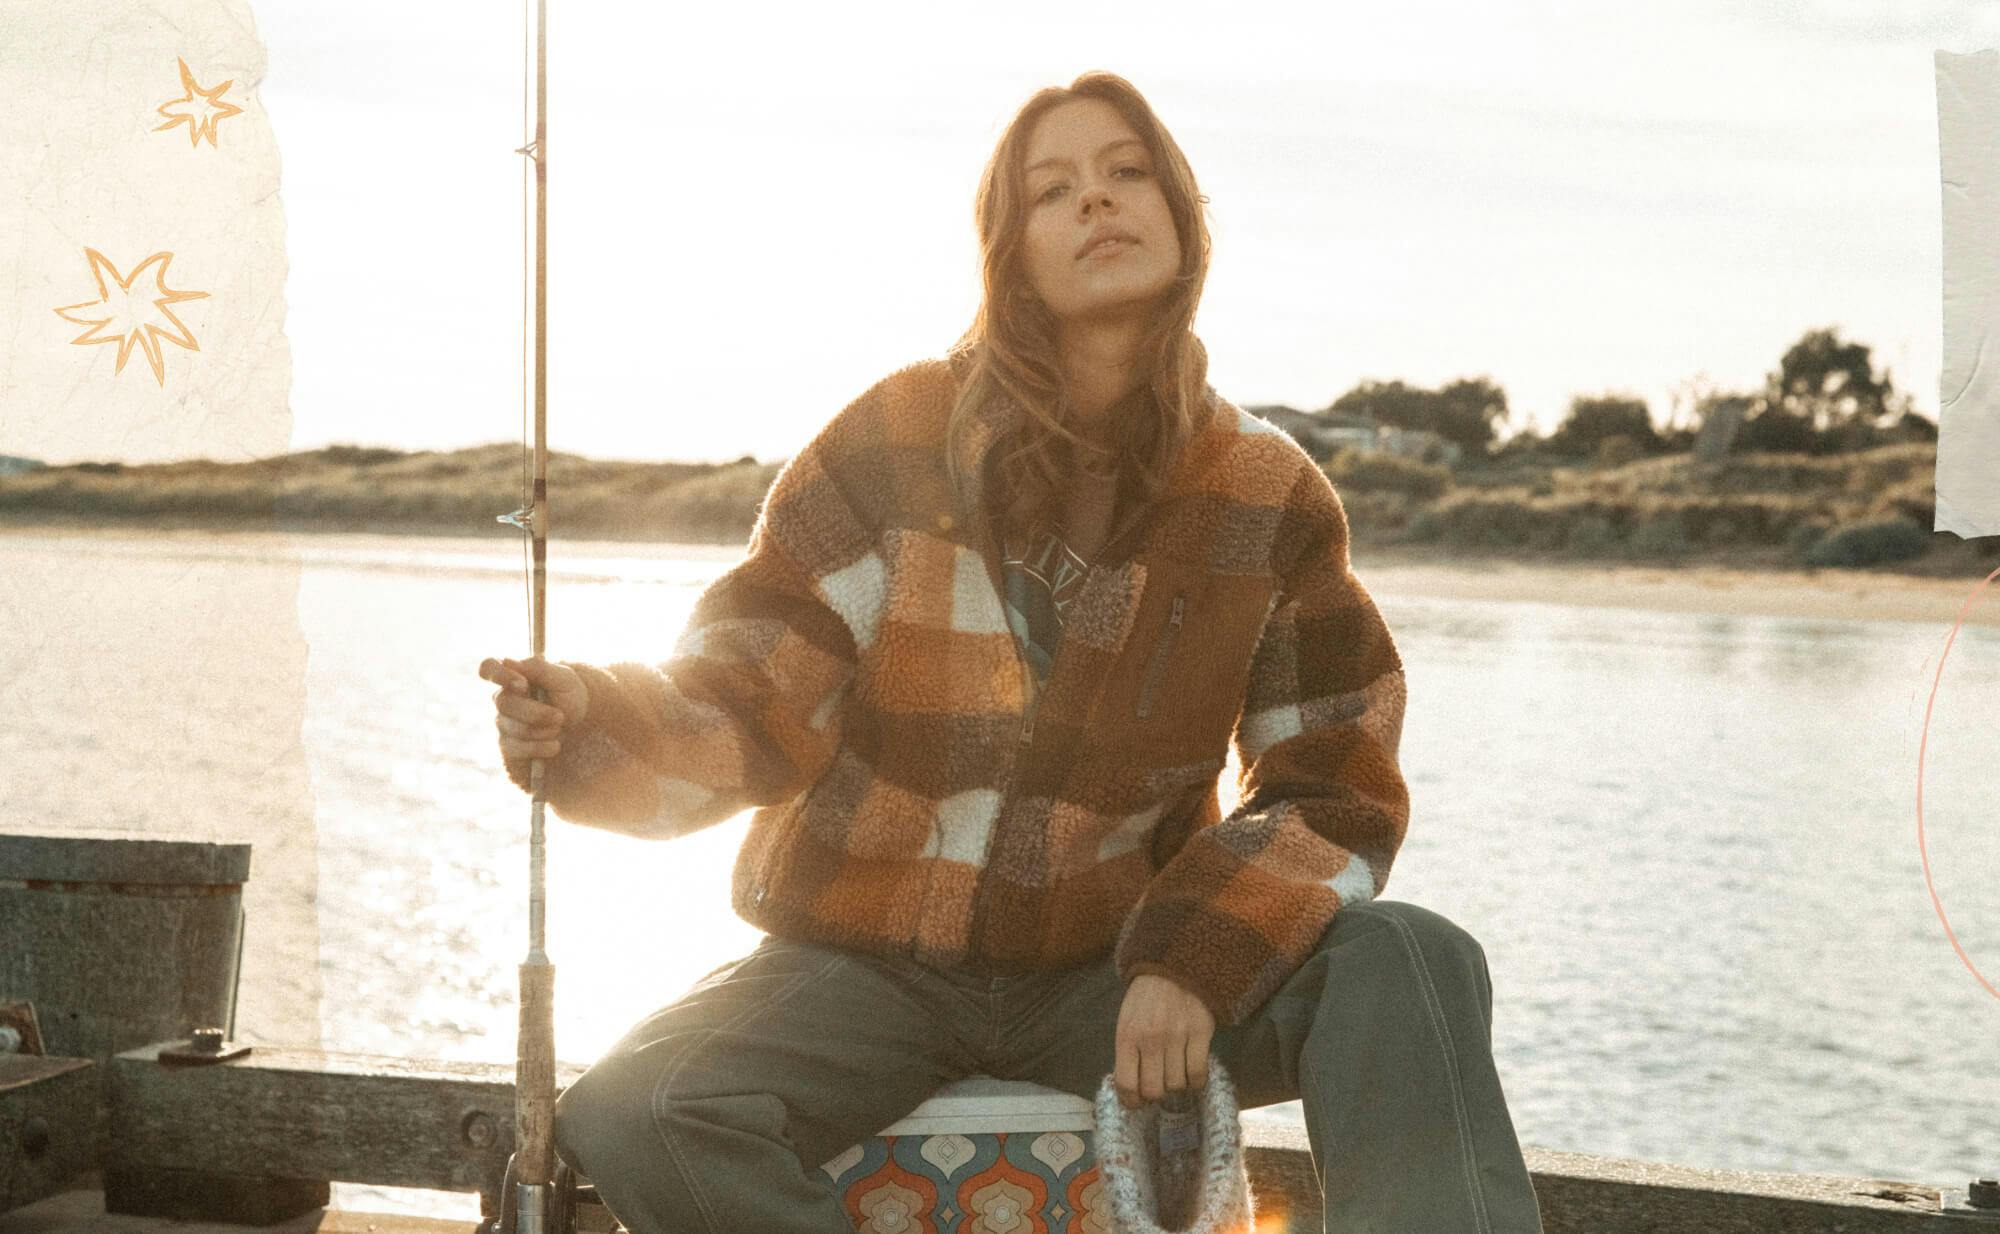 Image of female model sitting on an esky at the end of a pier holding a vintage fishing rod. She is wearing the Vacay Crew under the Outback Jacket with the Commando Pants.